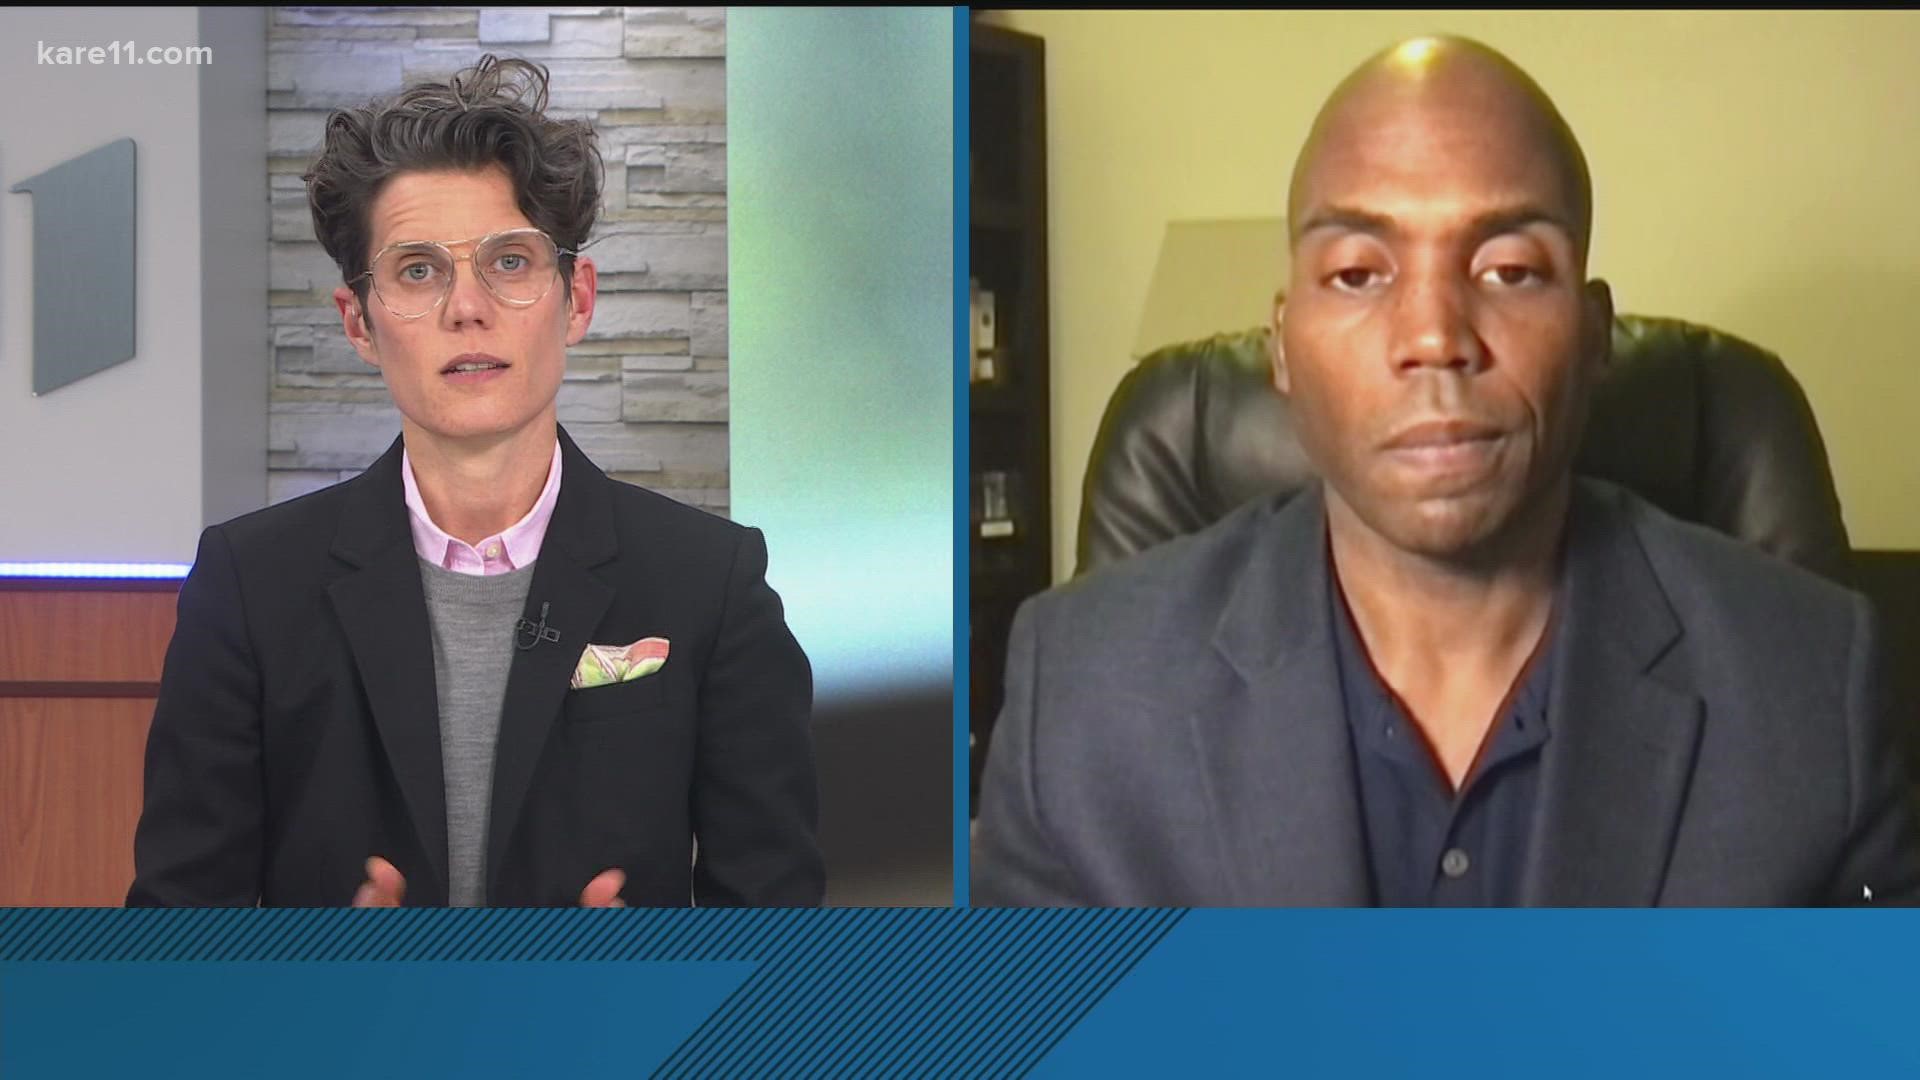 St. Thomas professor Dr. Yohuru Williams talks about the latest racist incident at Prior Lake High School and what impact it has on the students and the community.